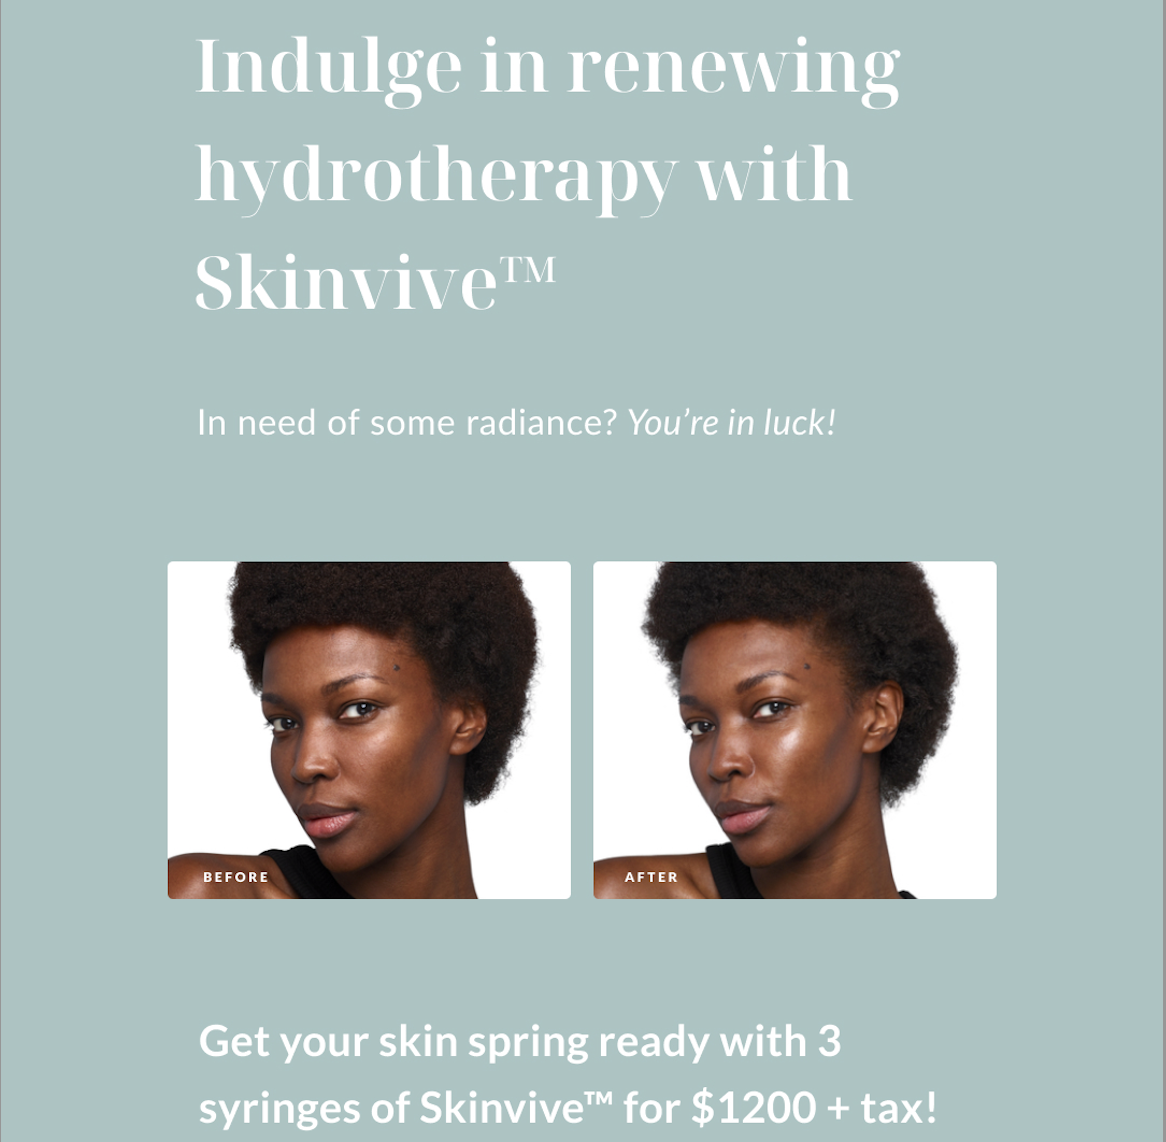 hydrotherapy skinvive treatment showing before and after with skinvive the after is a woman with noticeably brighter skin